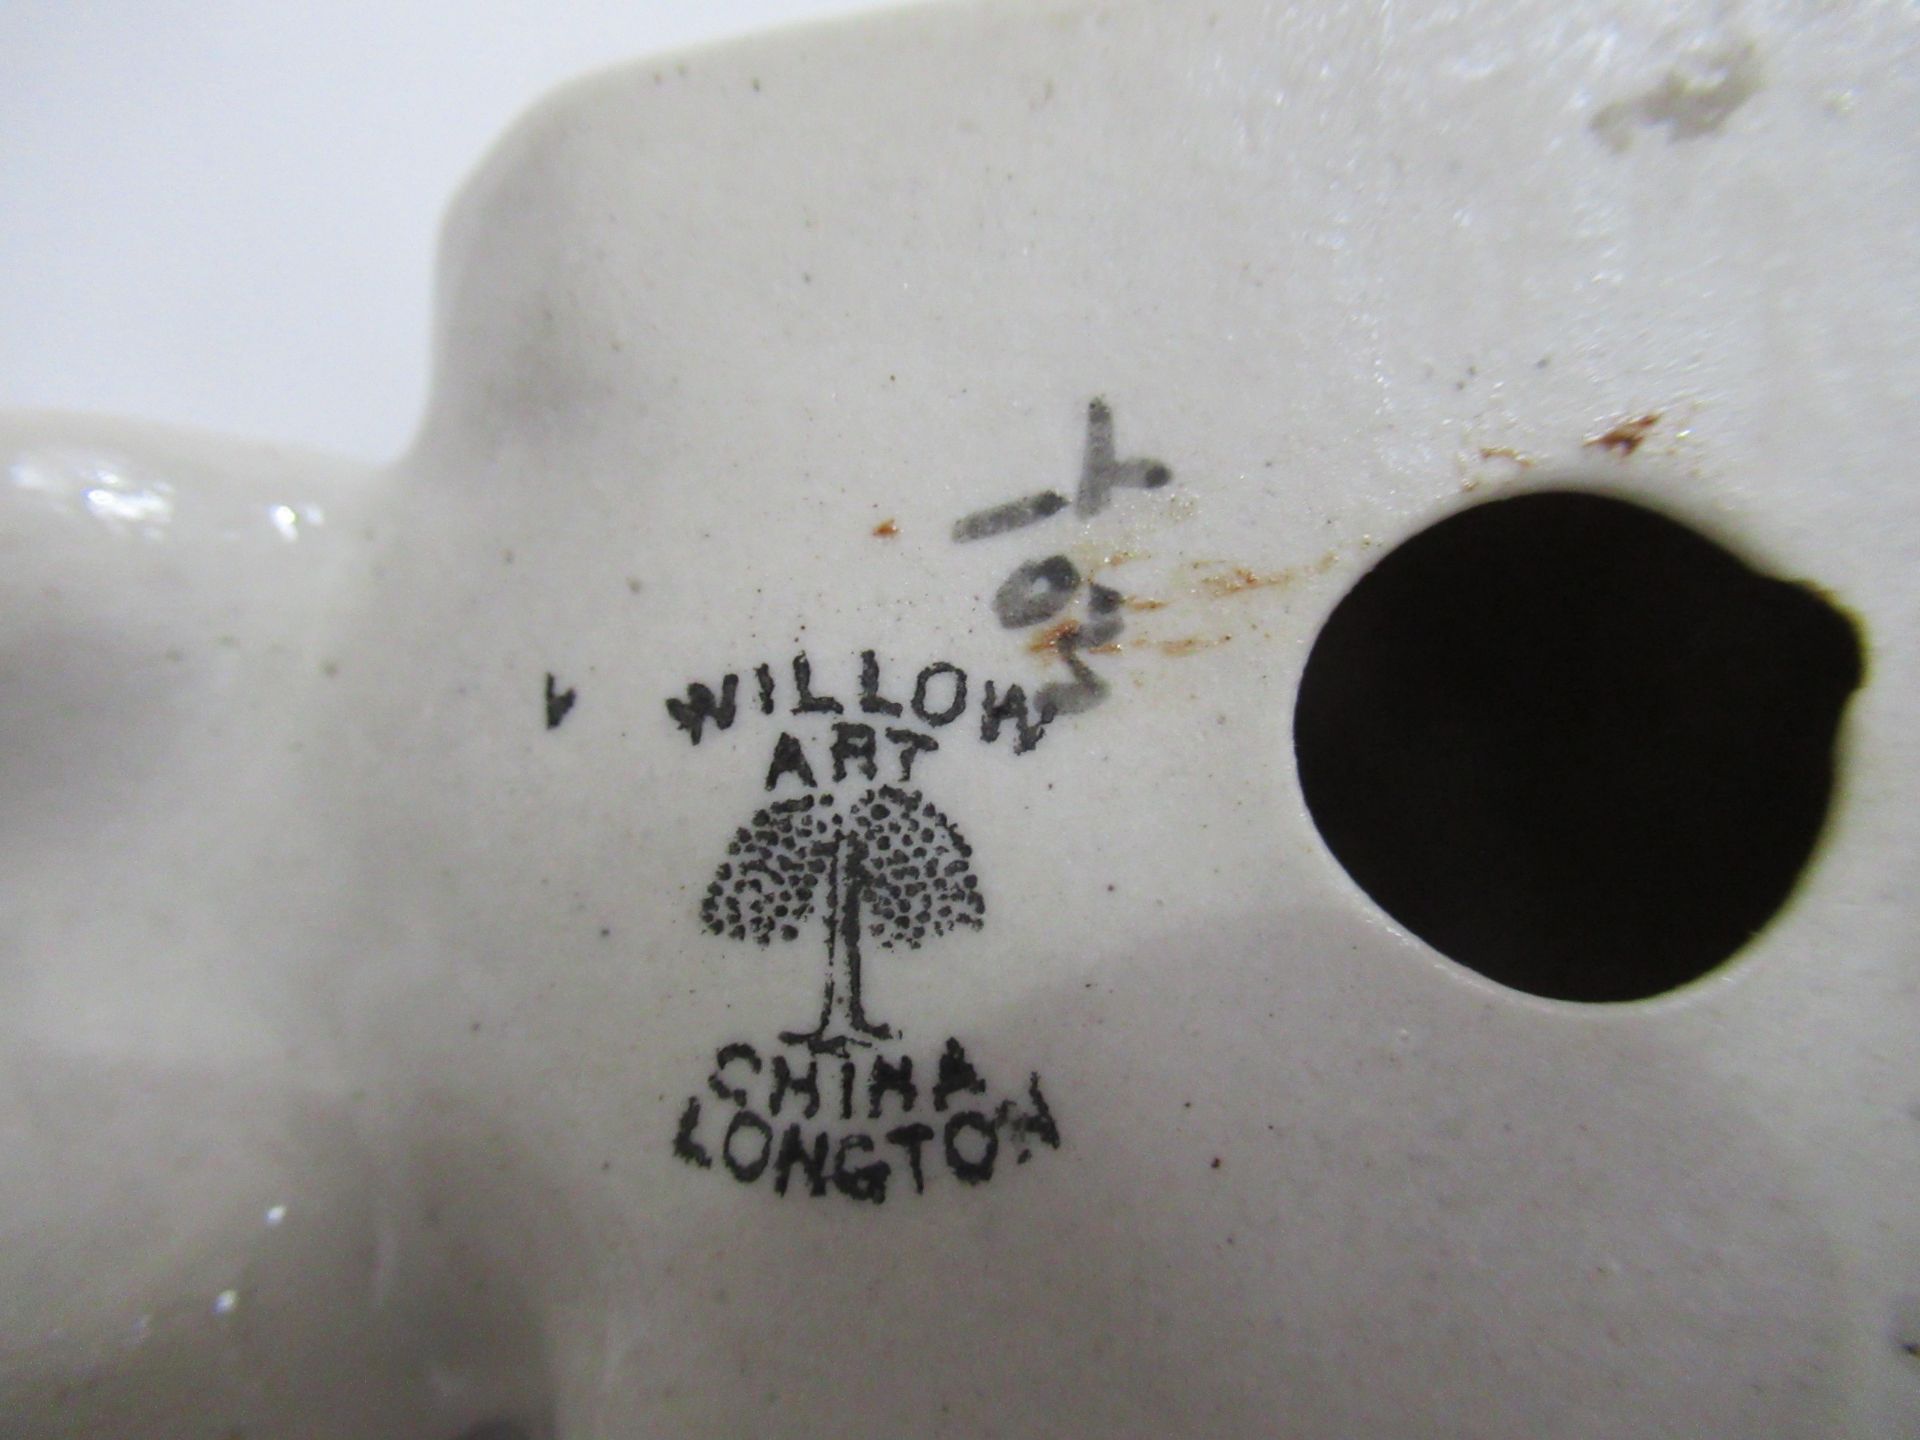 Crested China Willow art 'model of British Tank' with Derby coat of arms (130mm x 75mm) - Image 9 of 10